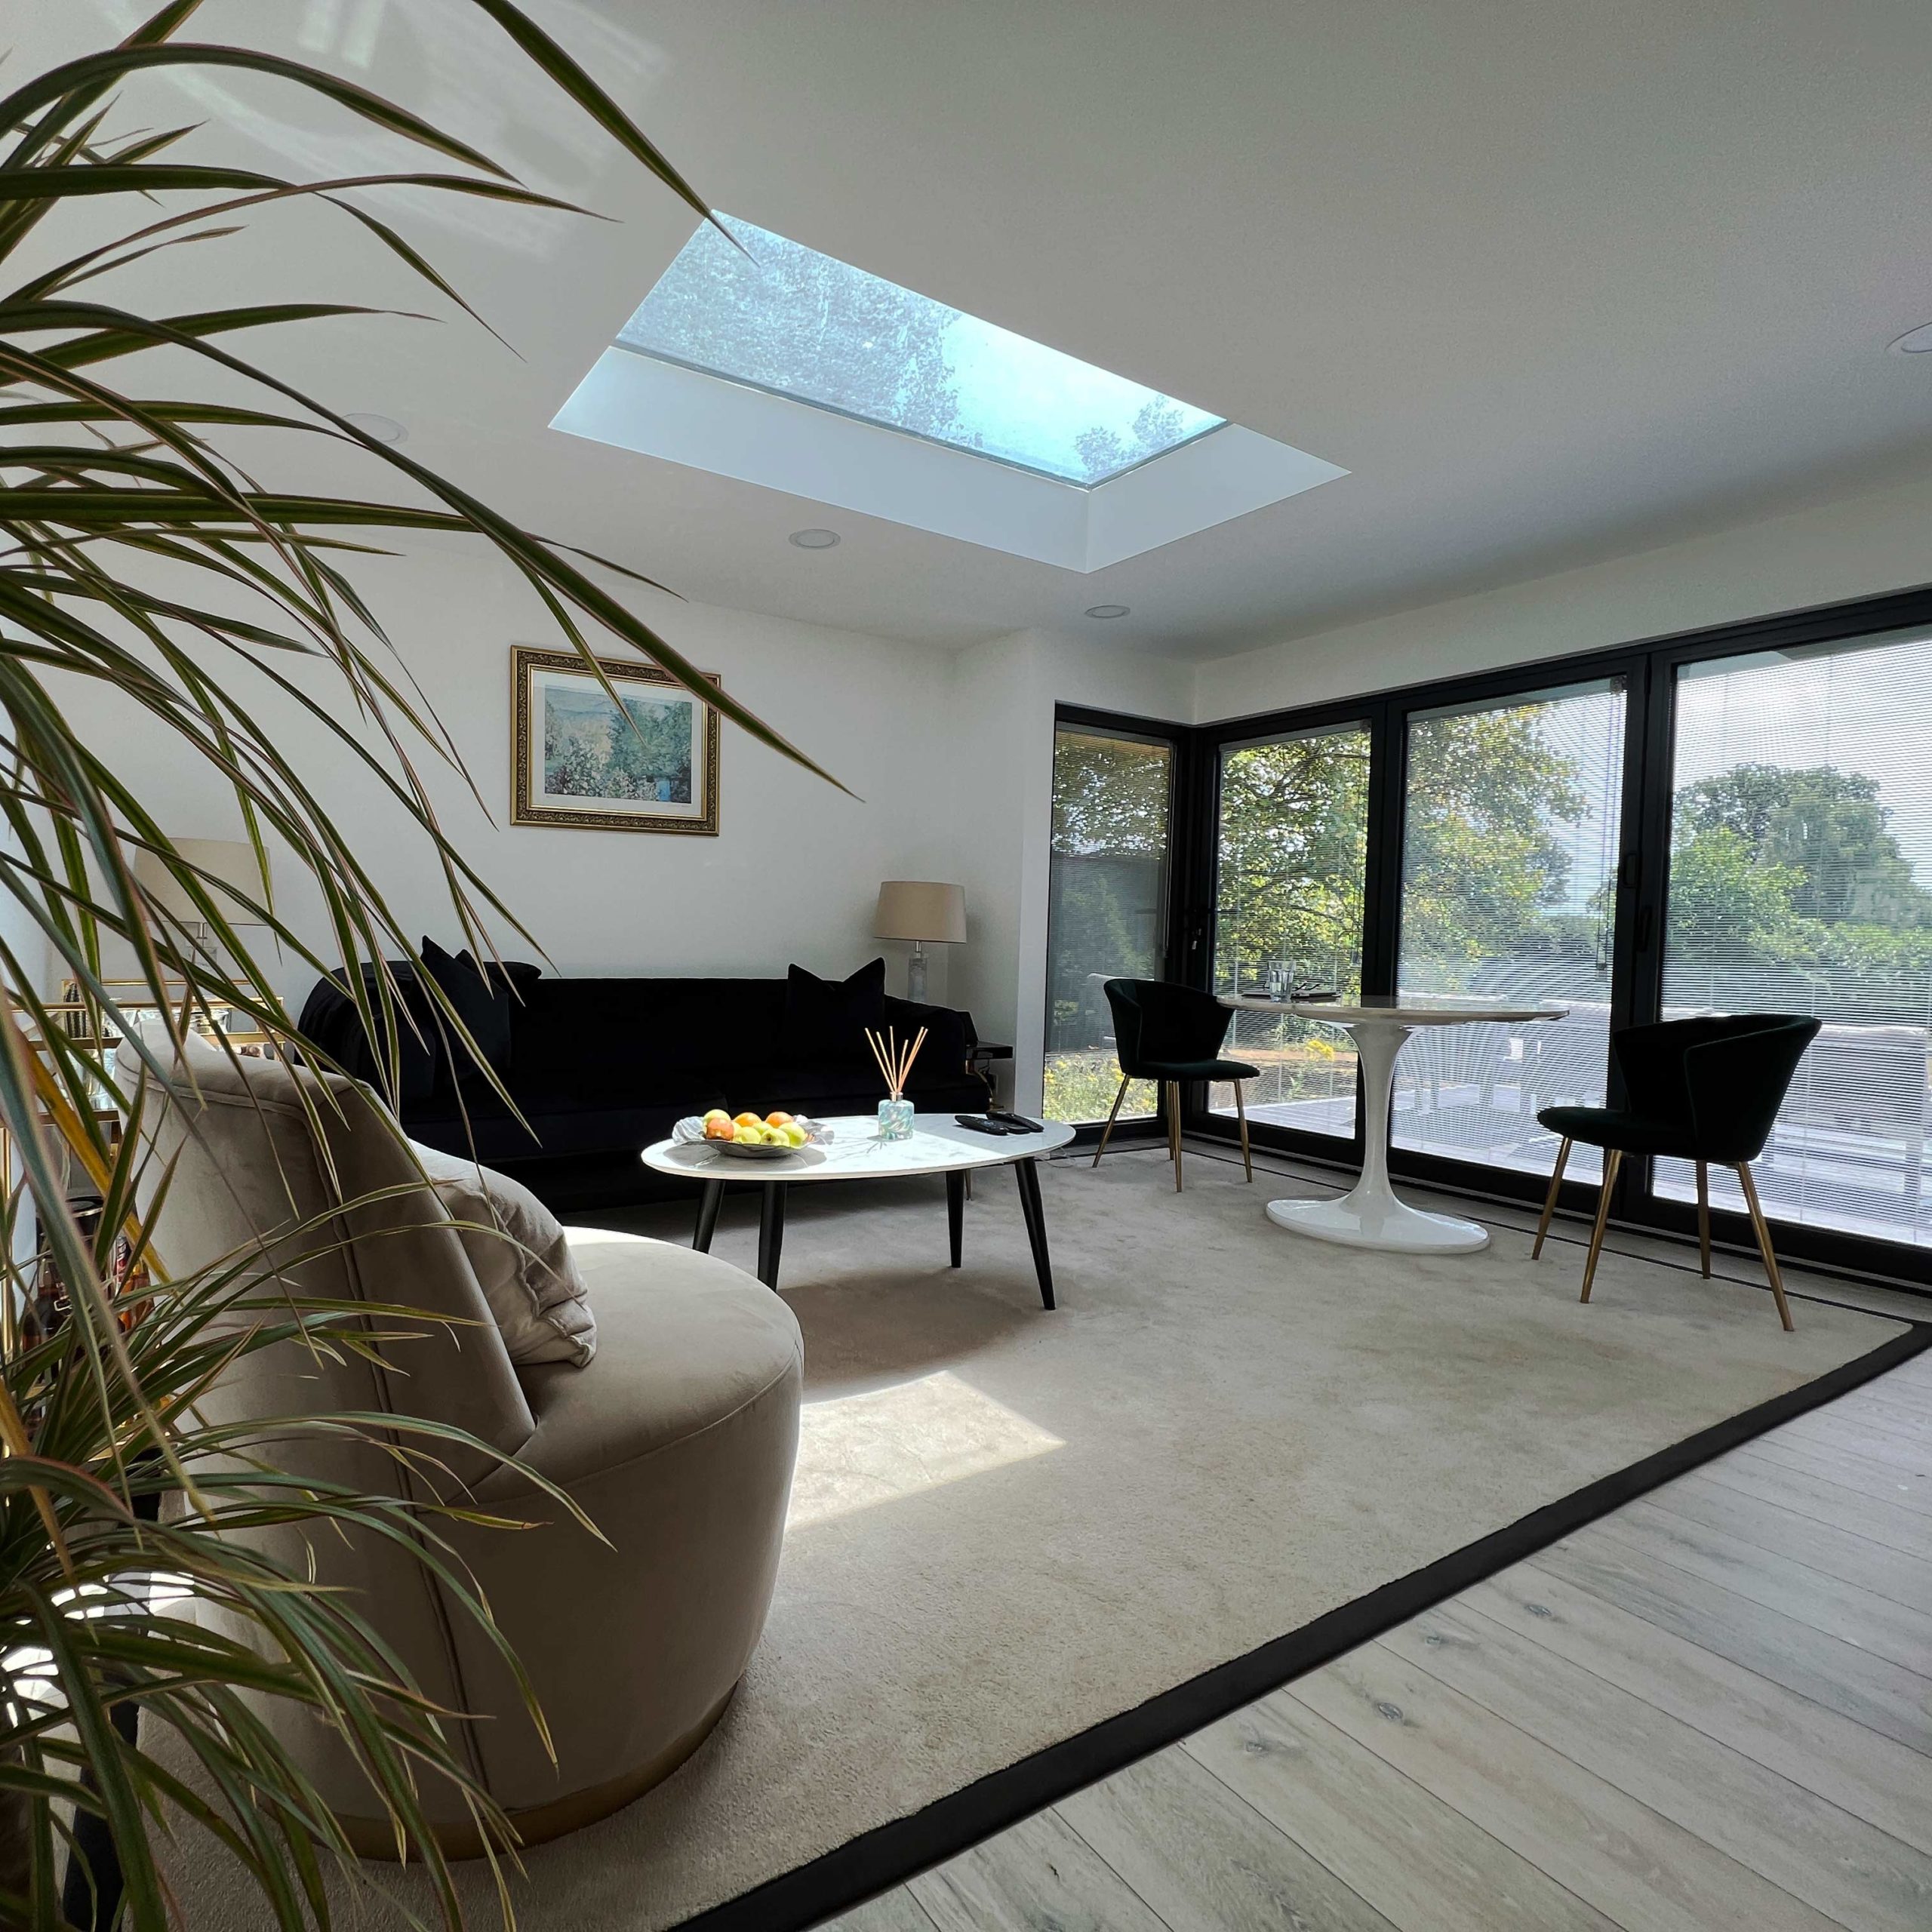 Unique garden annexe lounge with skylight